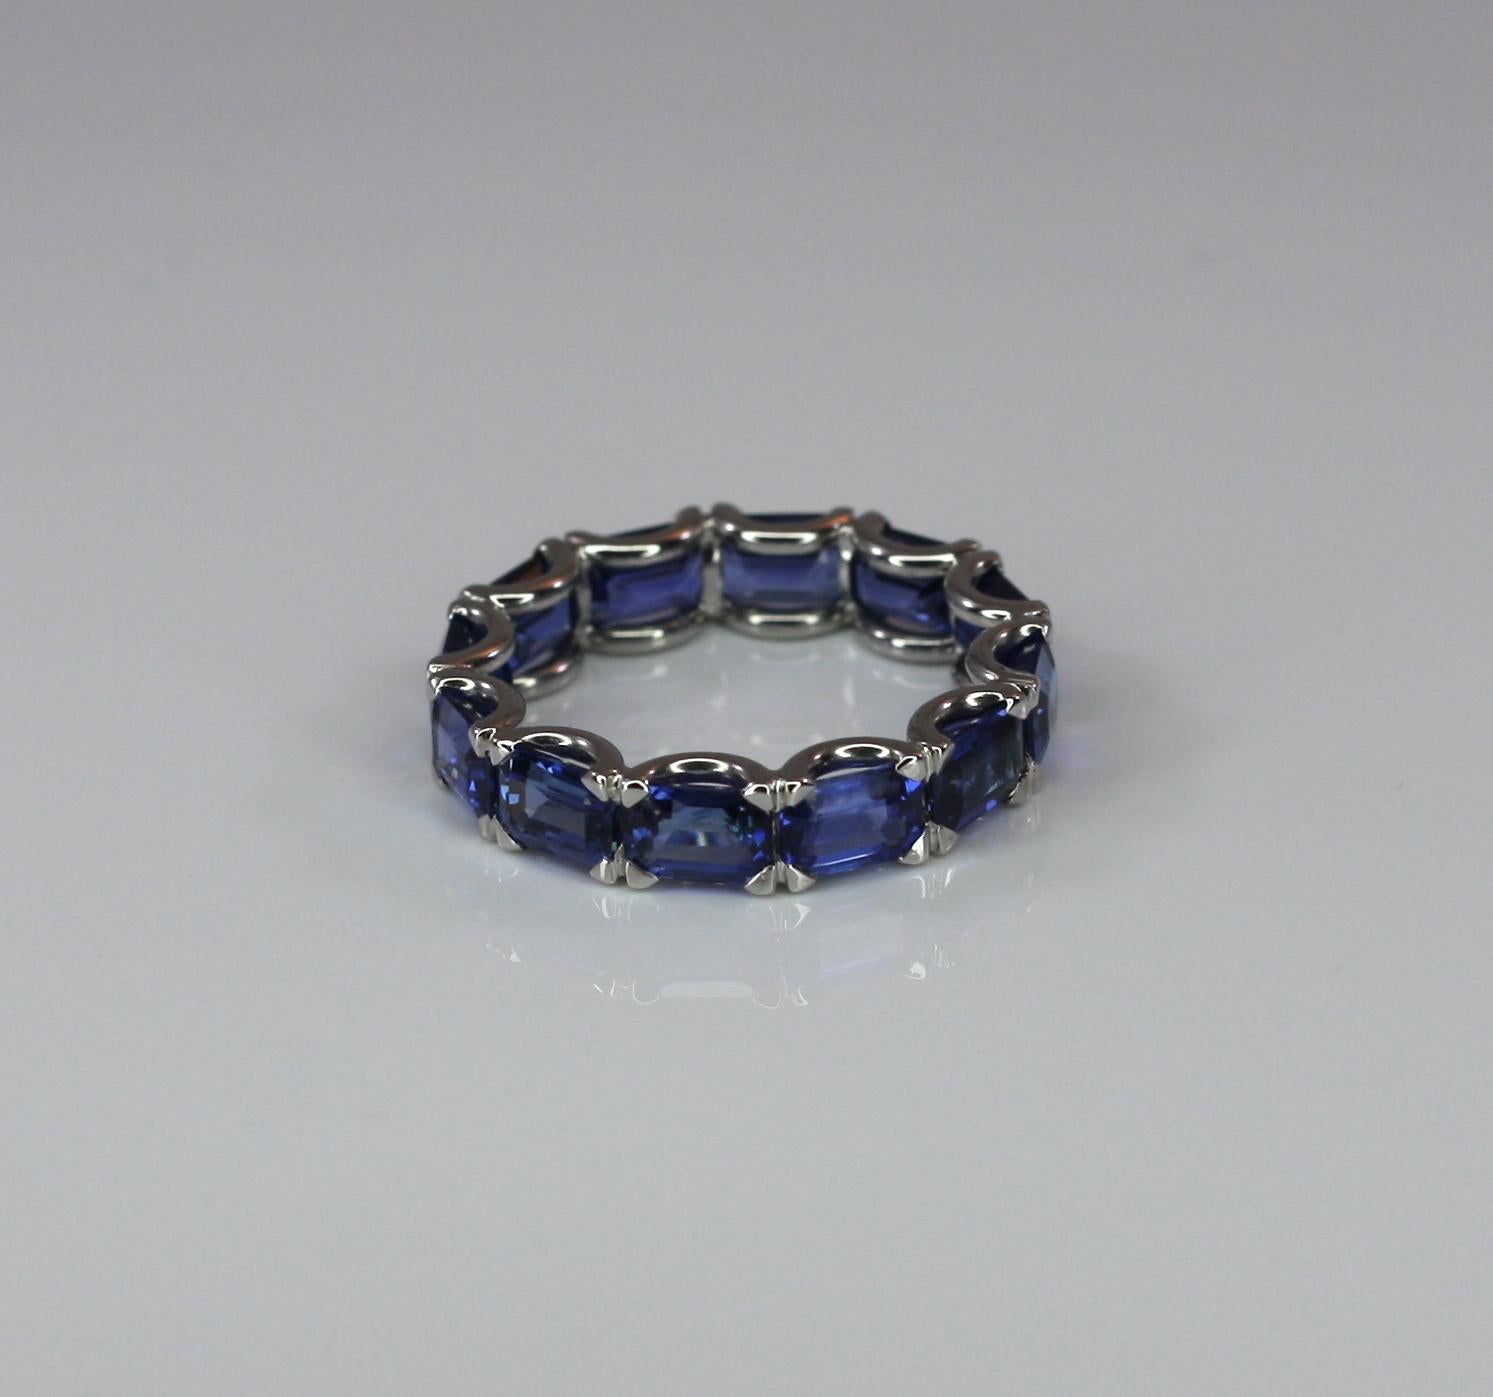 S.Georgios designer eternity sapphire band ring is handmade from 18 Karat white gold in Athens Greece. This gorgeous band ring features 8.72 Carat emerald cut Natural Blue Sapphires in a beautiful setting.
All Georgios Collections jewelry is